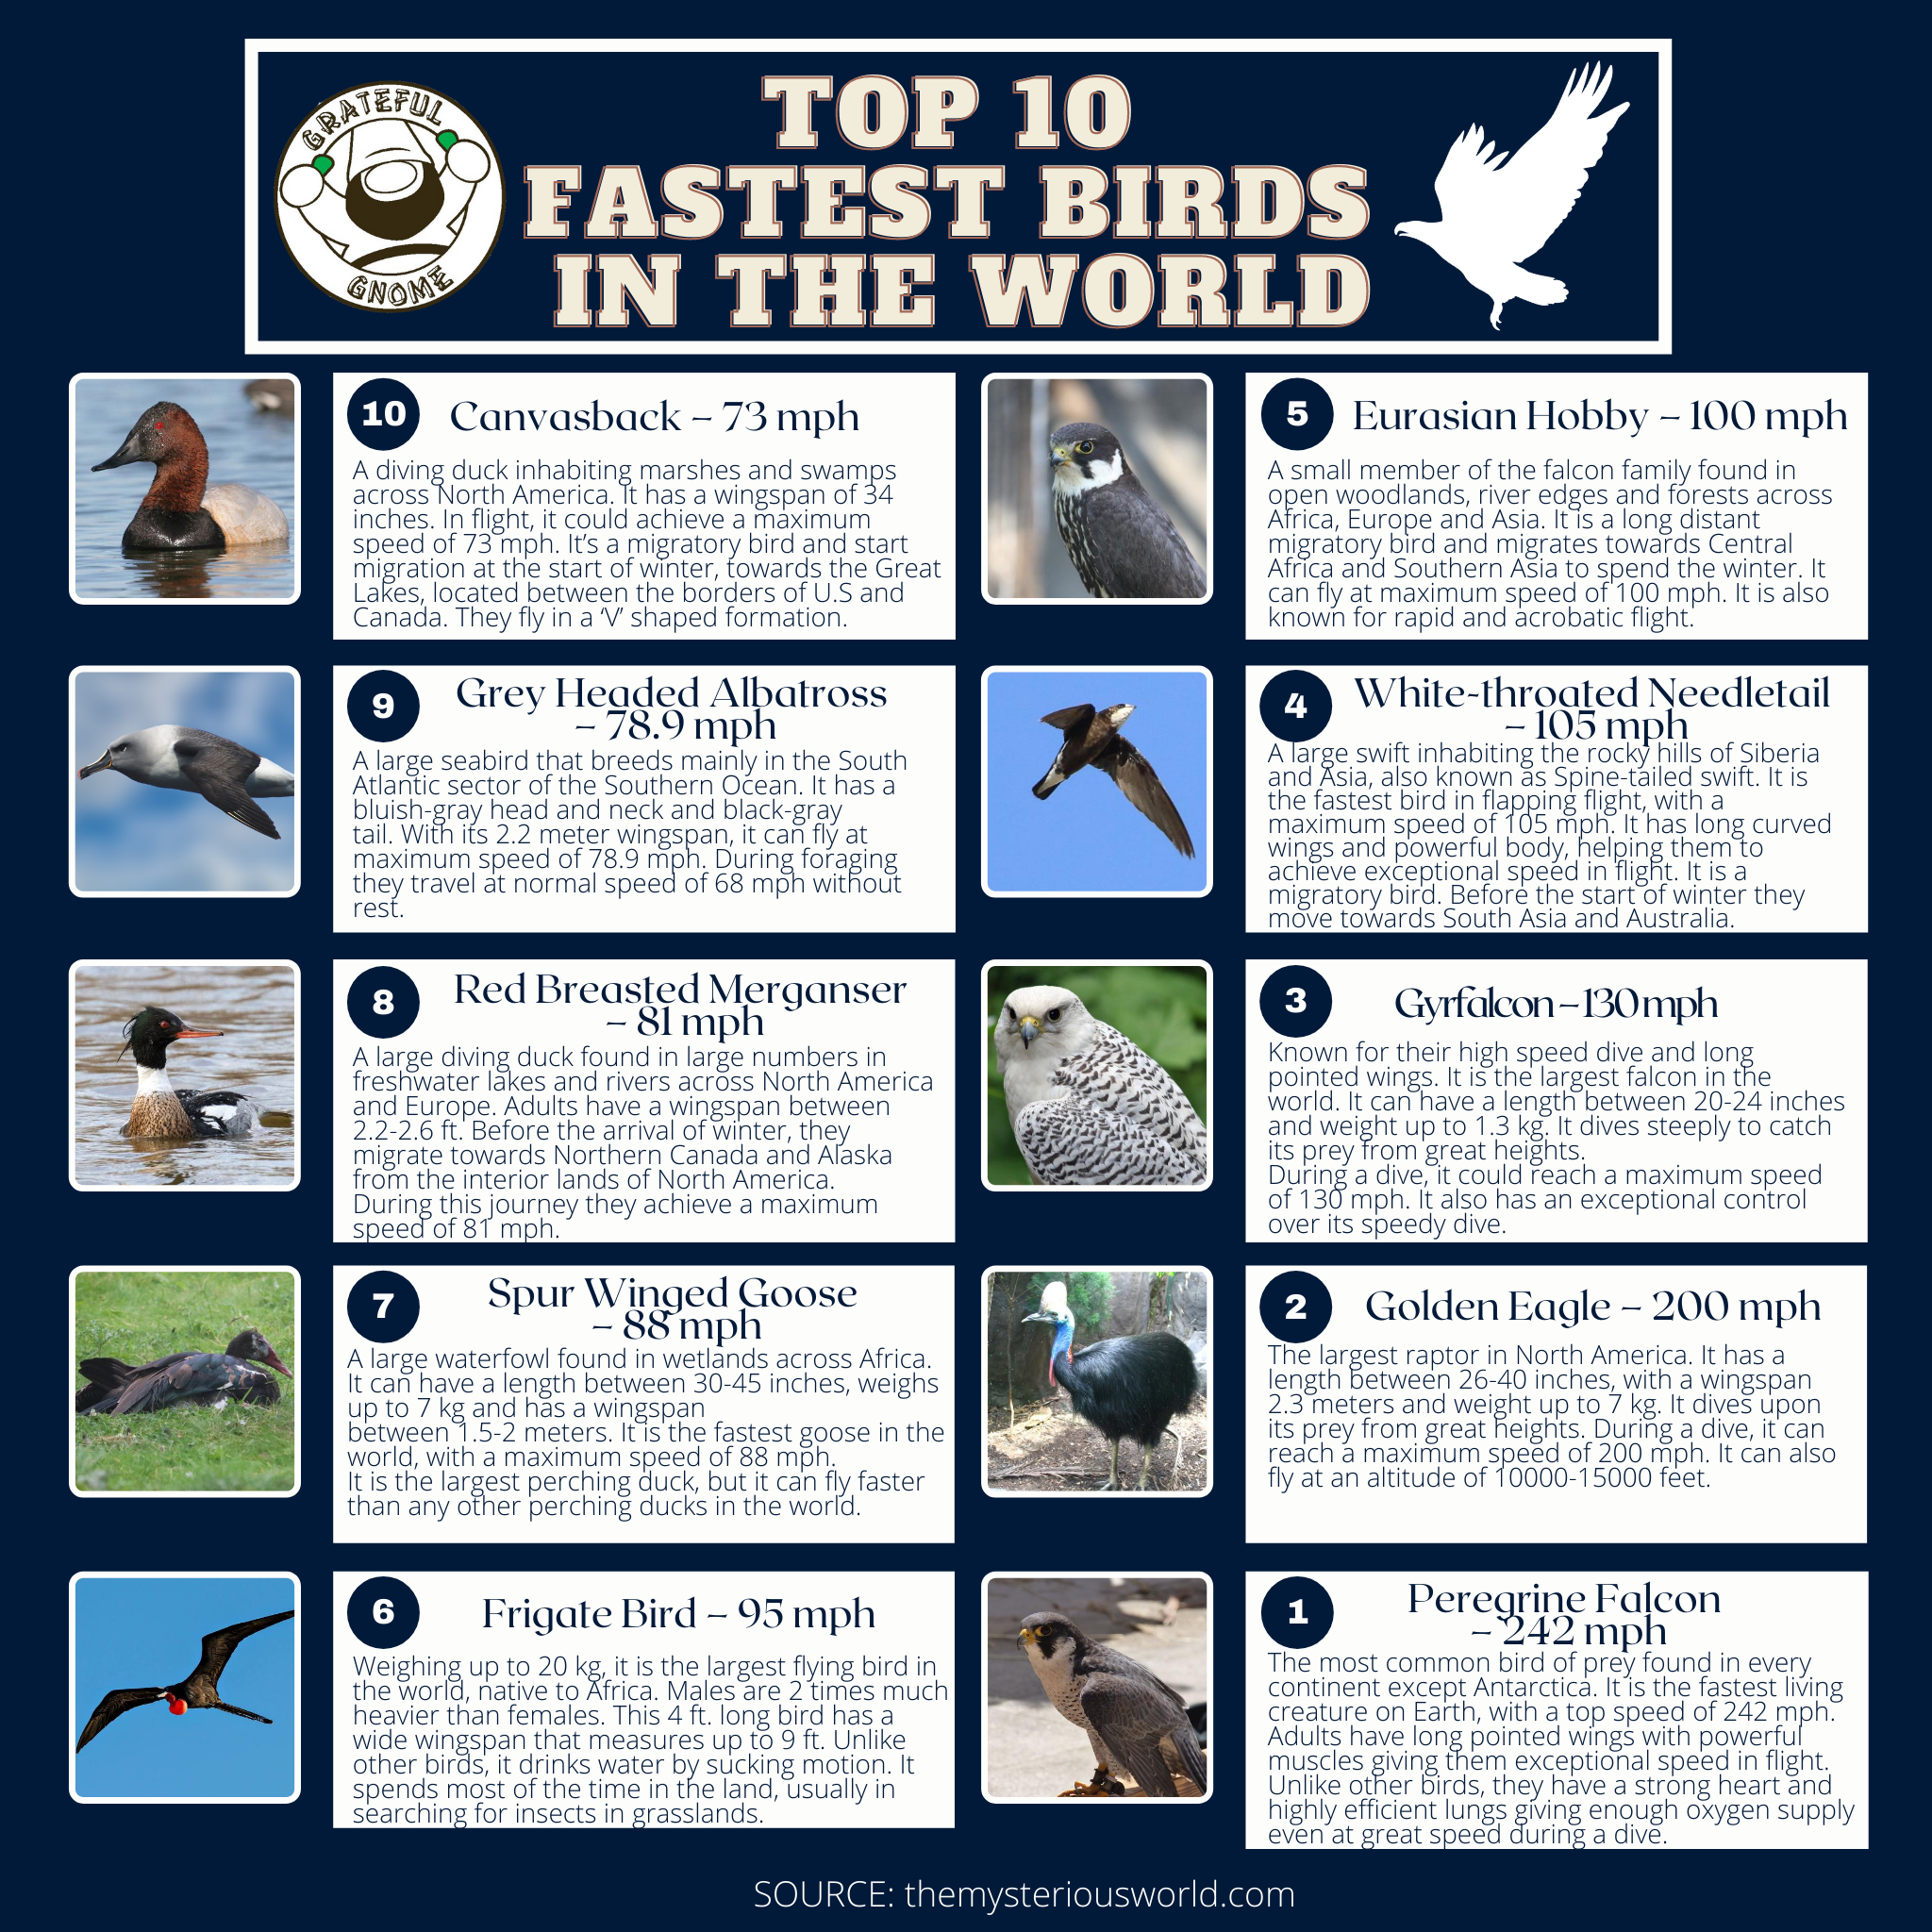 What is the top 10 fastest bird in the world?